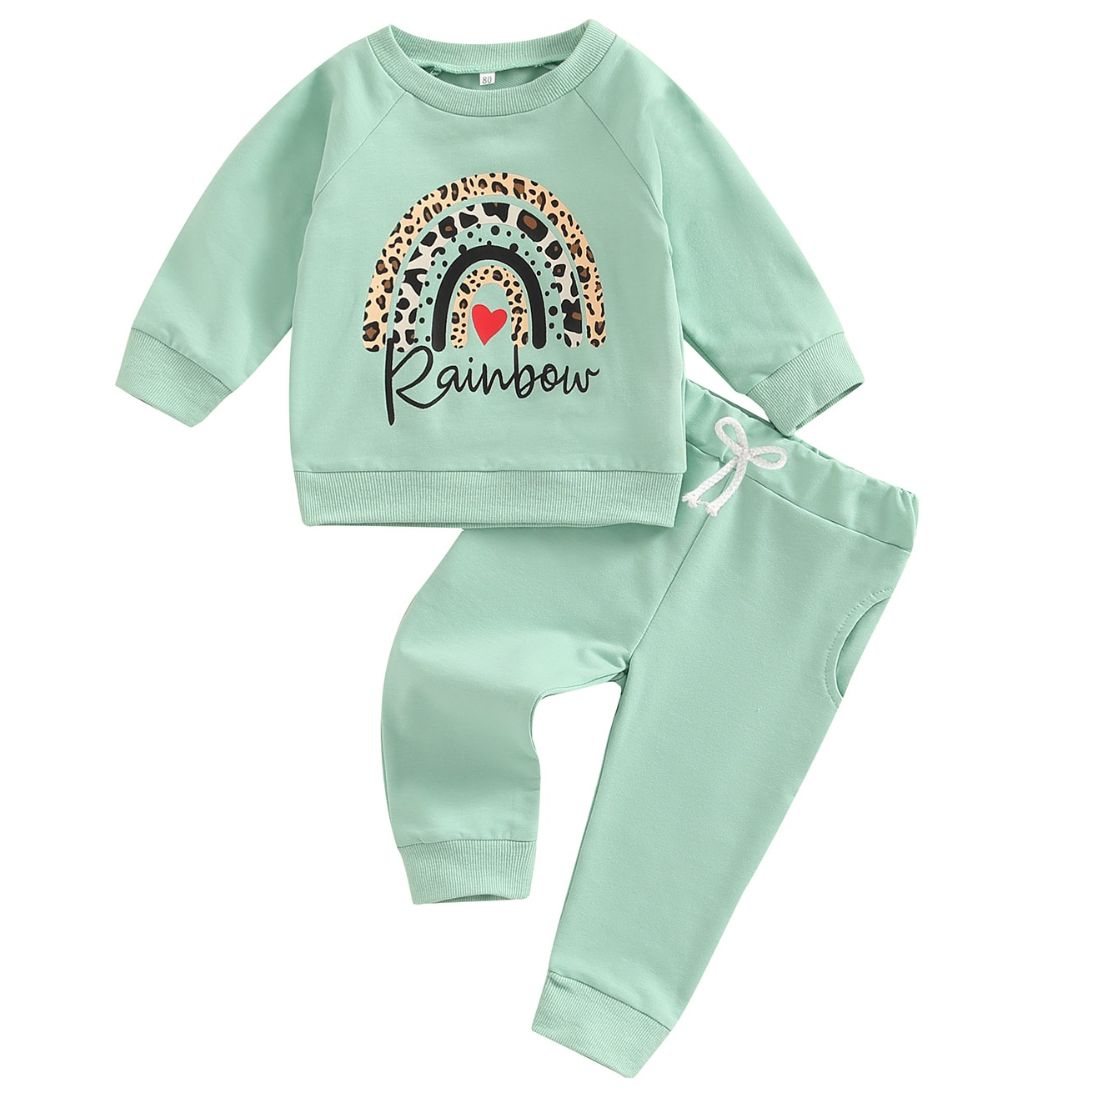 Baby Girl Rainbow Sweatshirt 2Piece Clothing Set- My Trendy Youngsters | Buy on-trend and stylish Baby and Toddler Clothing Sets @ My Trendy Youngsters - Dress your little one in Style @ My Trendy Youngsters 